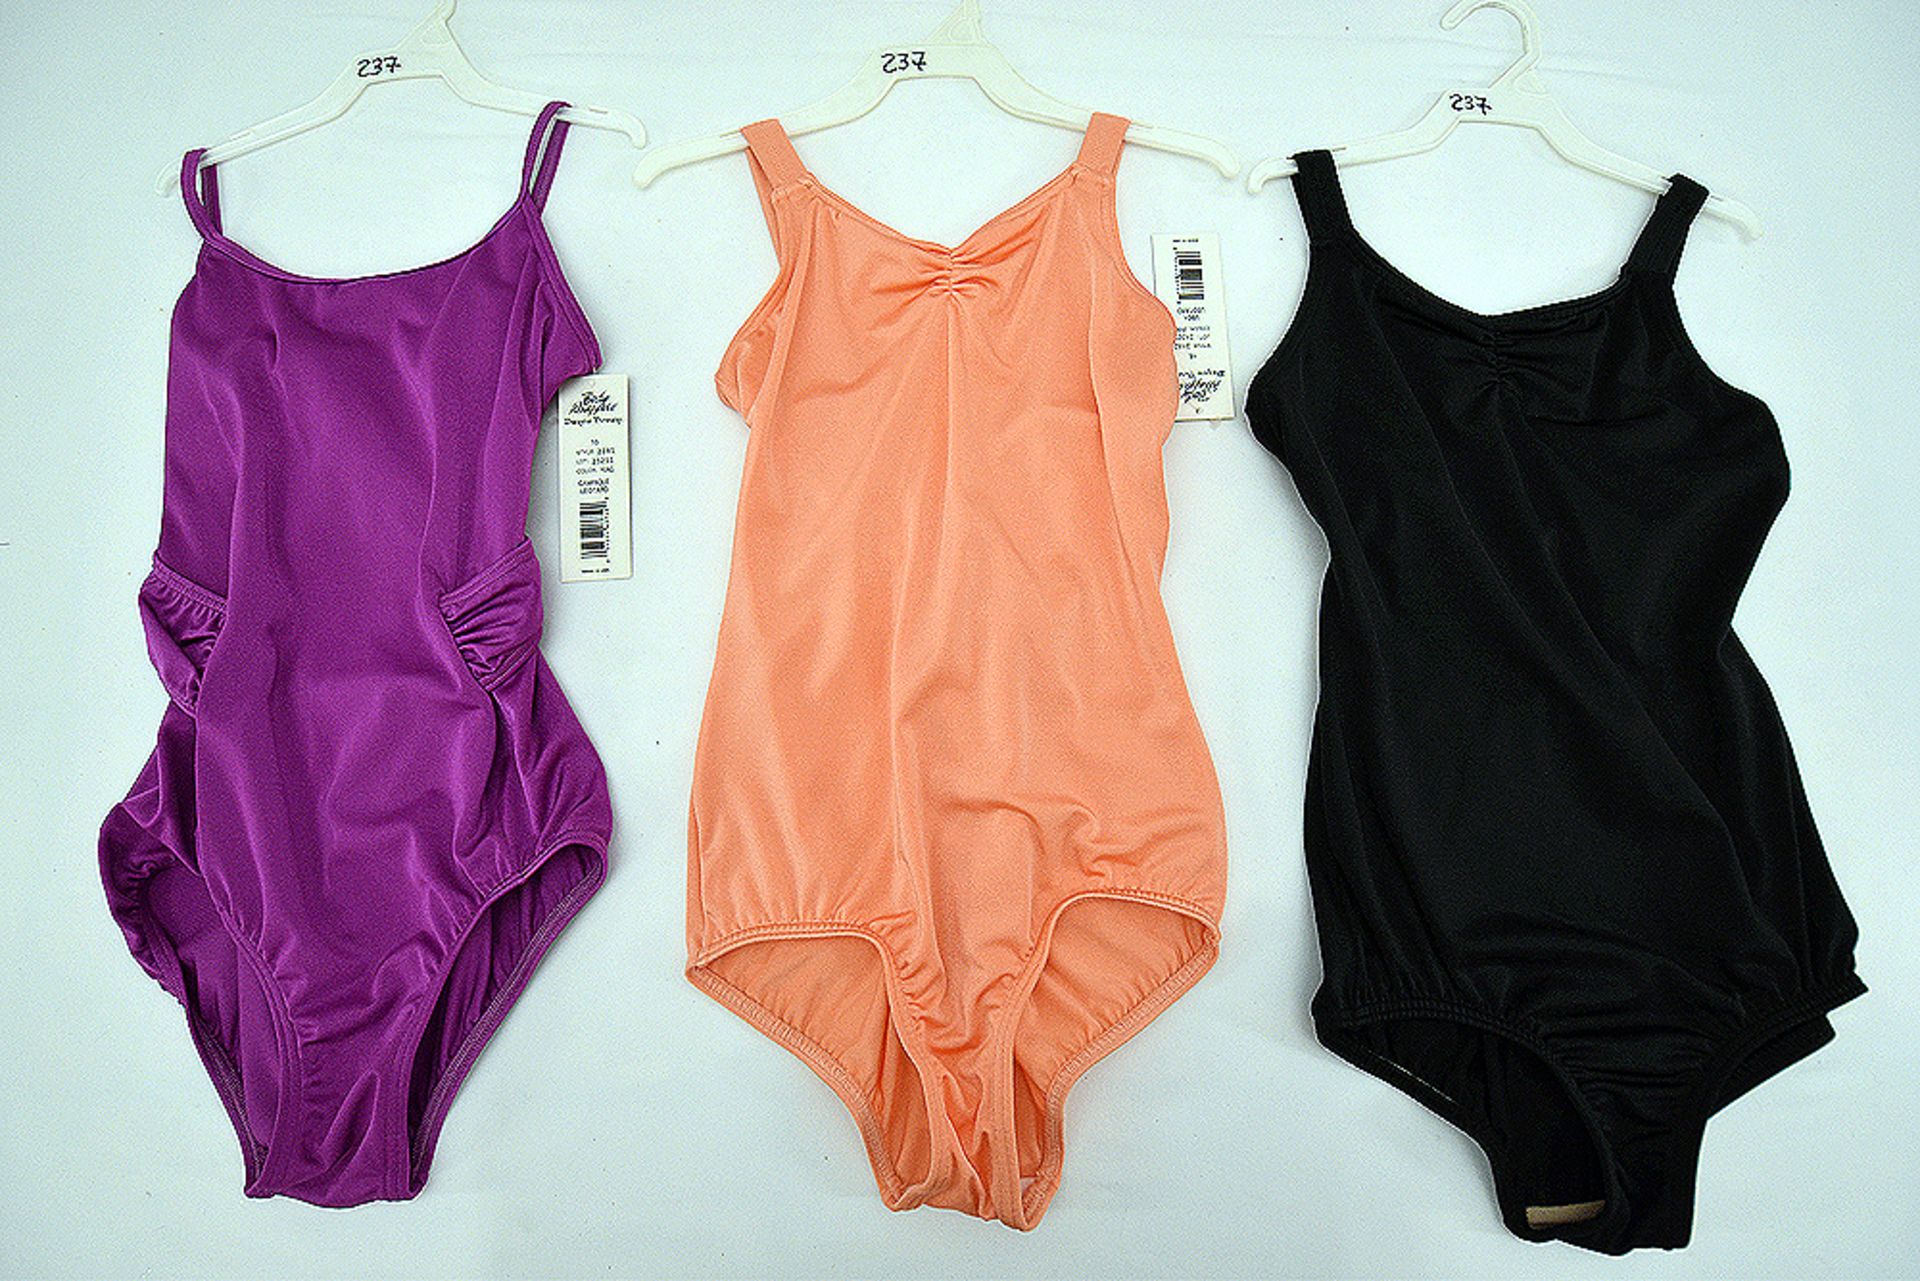 Ass't Size Tank and Camisole Leotards (MSRP $25)